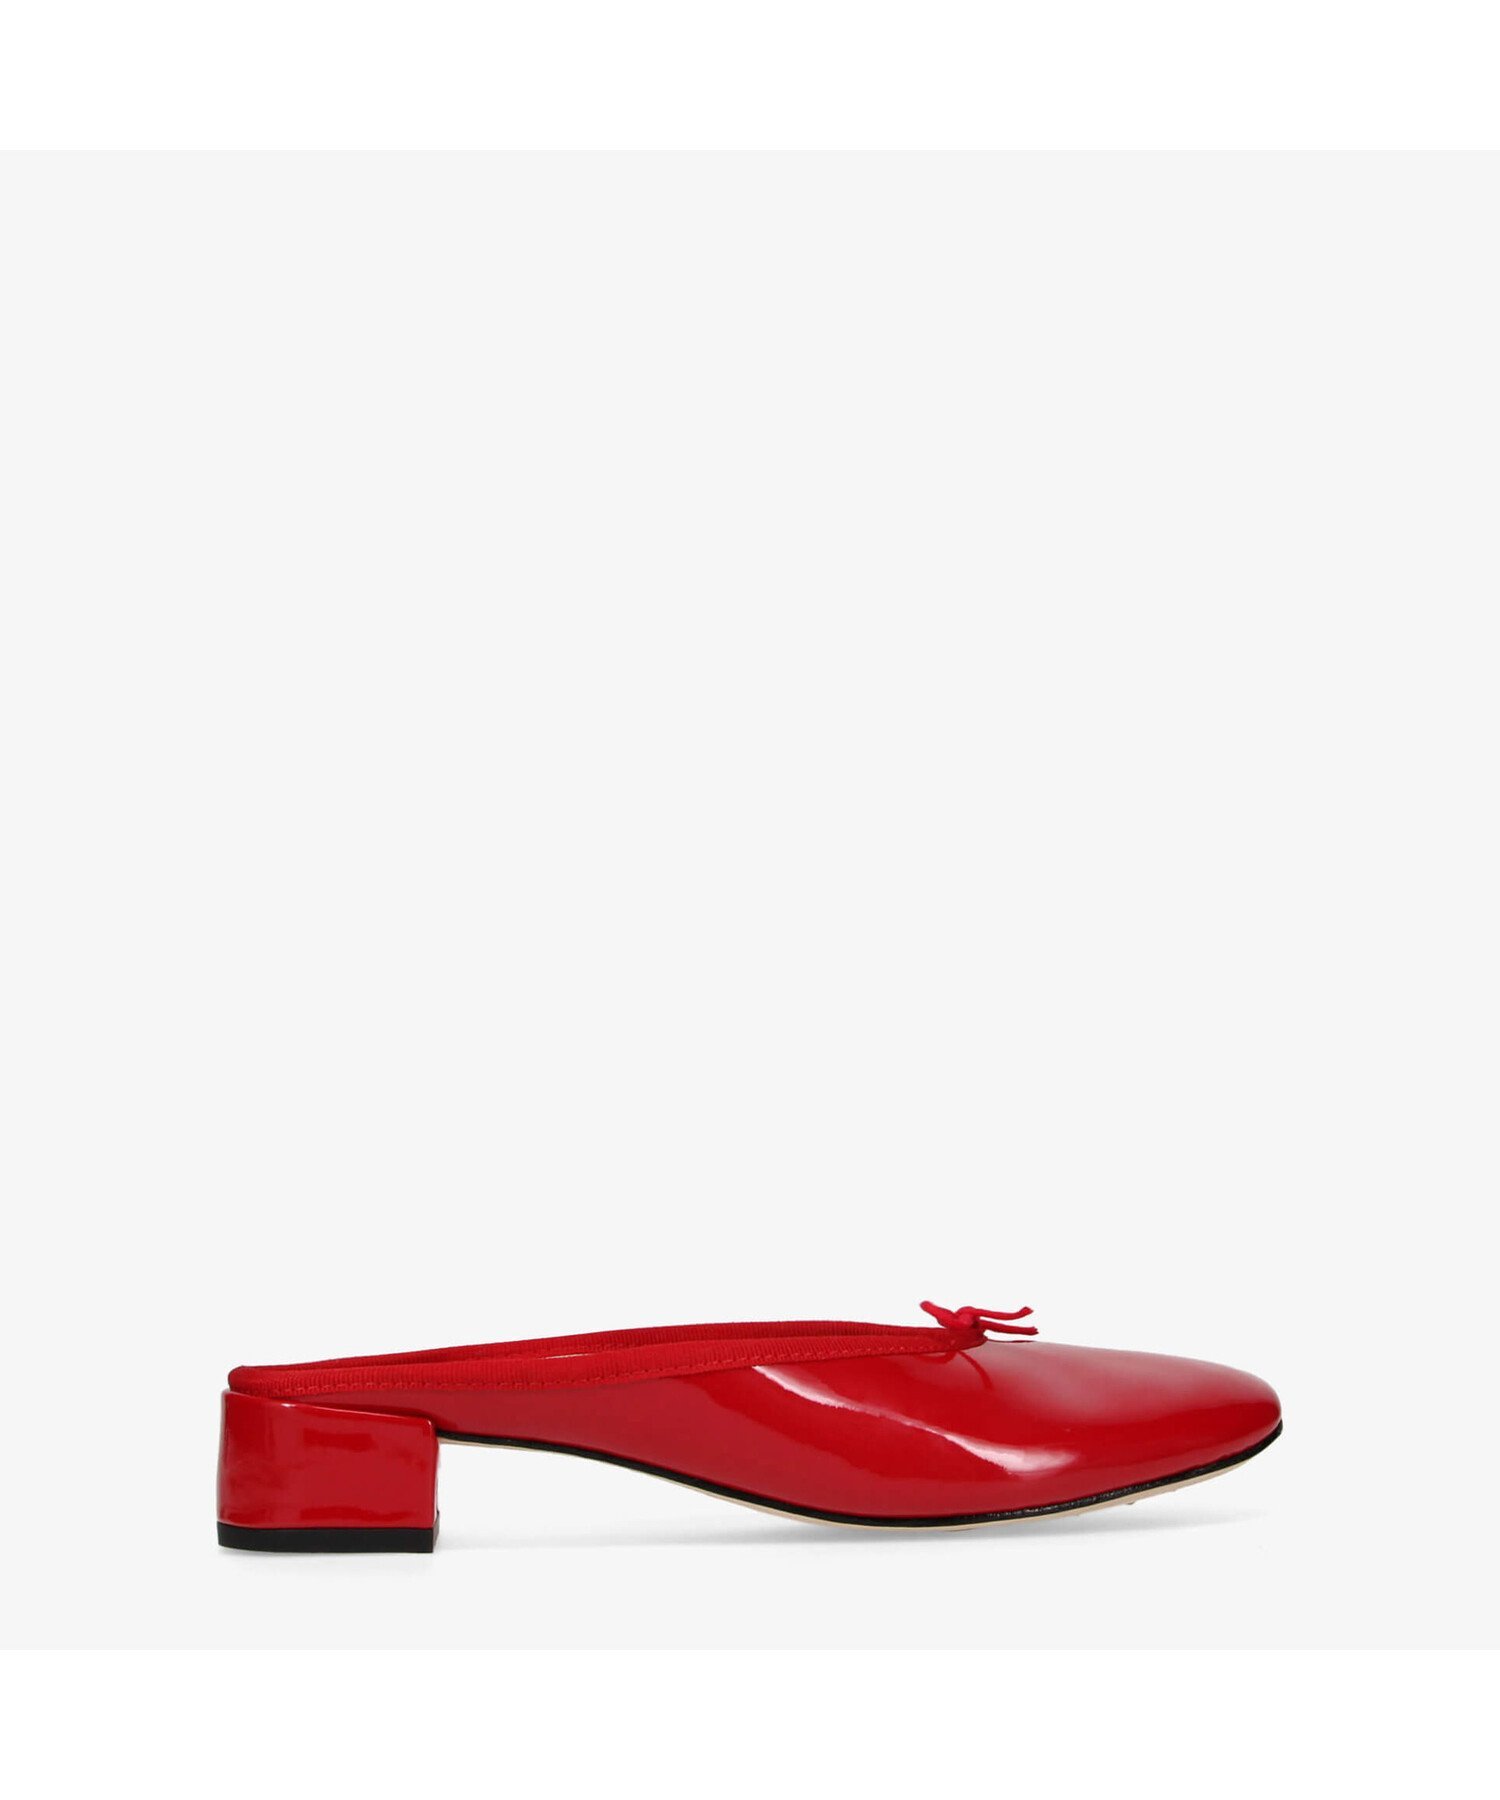 【SALE／20%OFF】Repetto Mules Camille【New Size】 レペット シューズ・靴 バレエシューズ【送料無料】